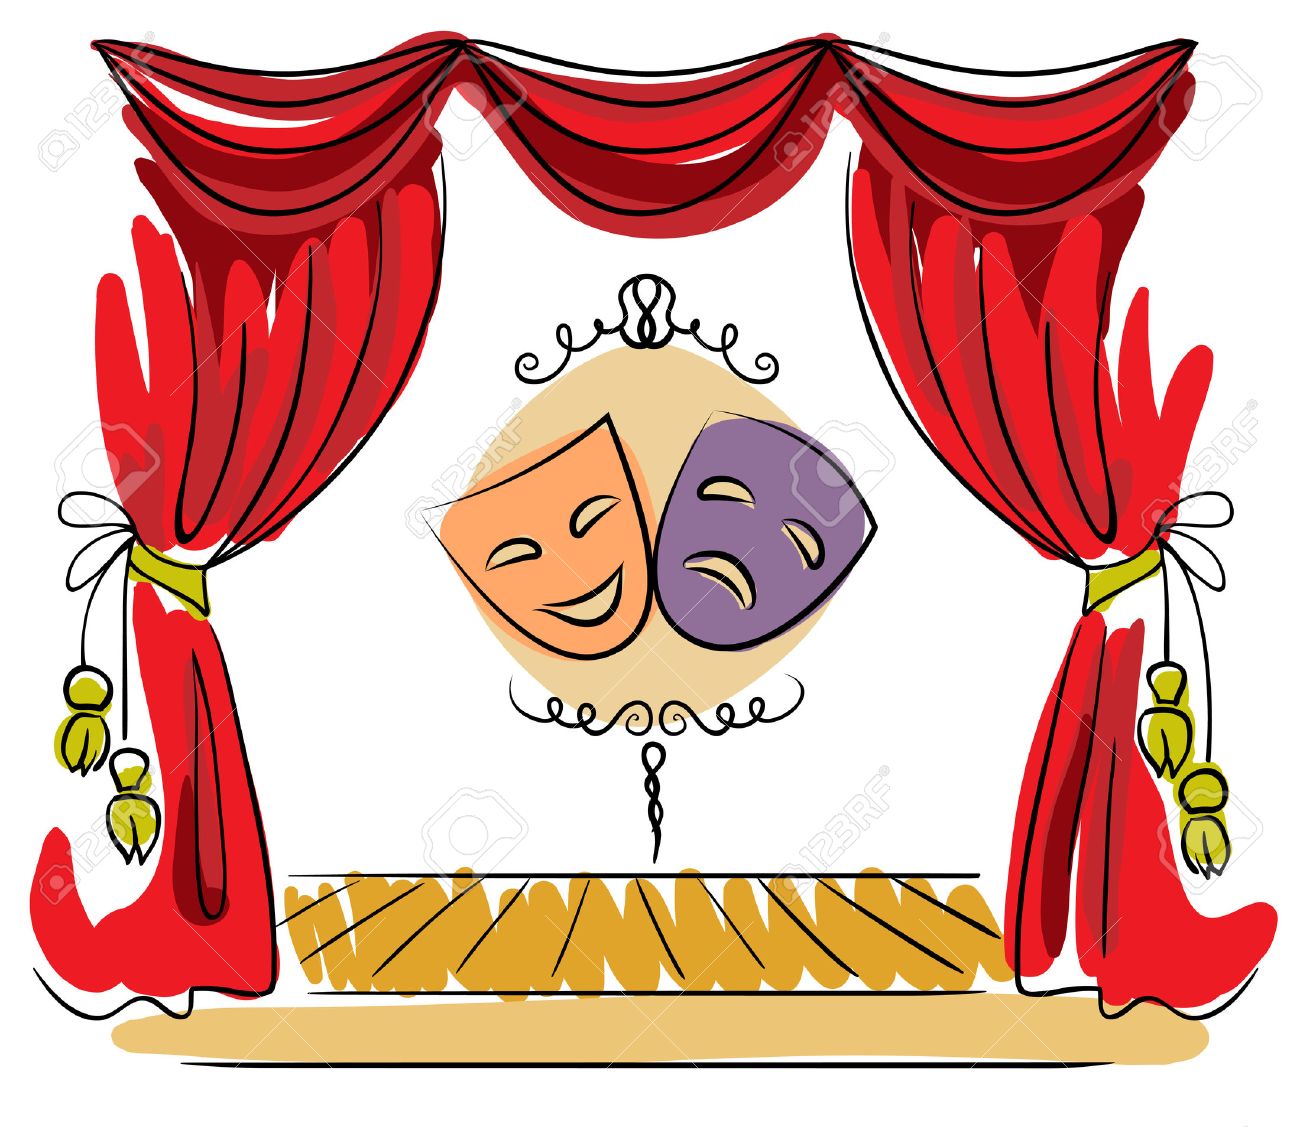 26000116-theater-stage-with-red-curtain-and-masks-illustration